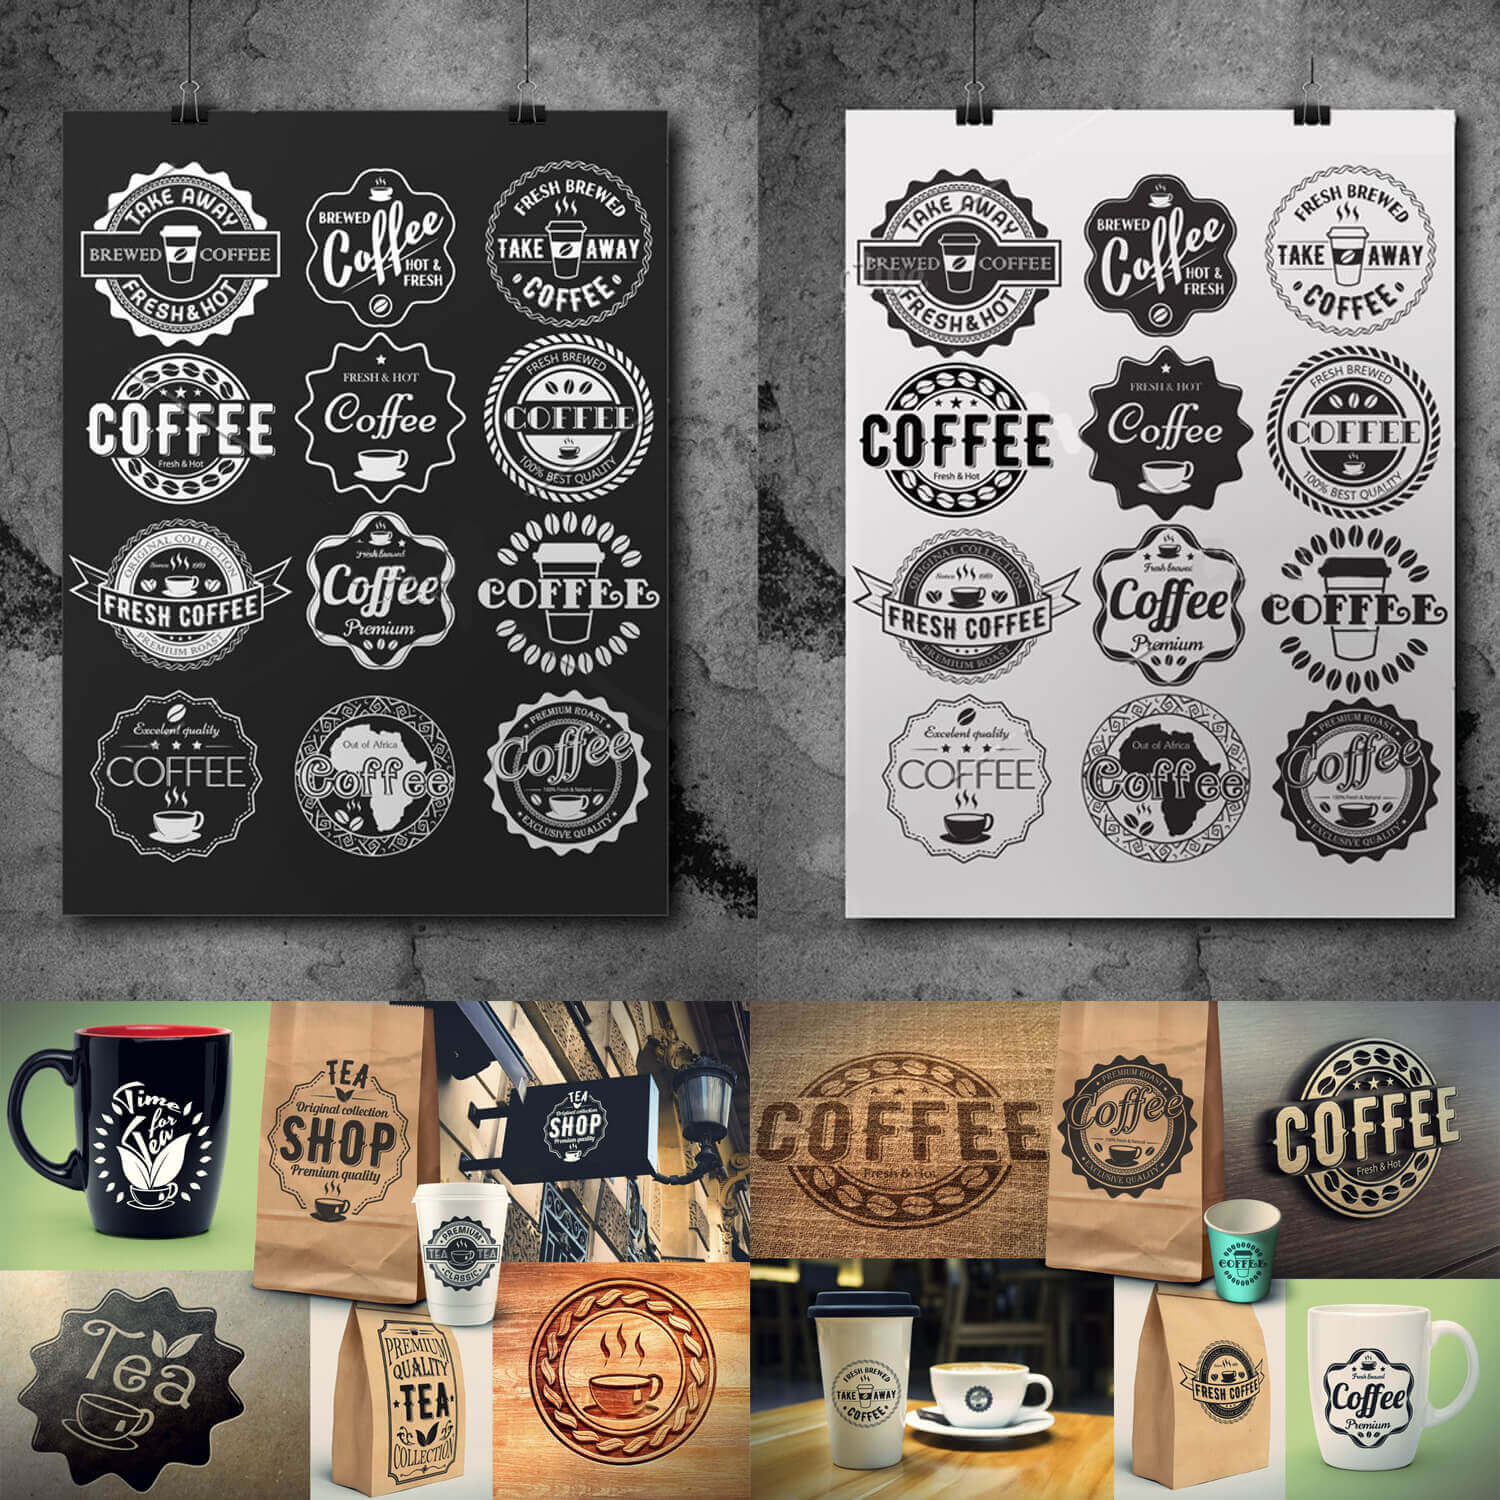 Sets of 12 bakery logos on black and white canvases.